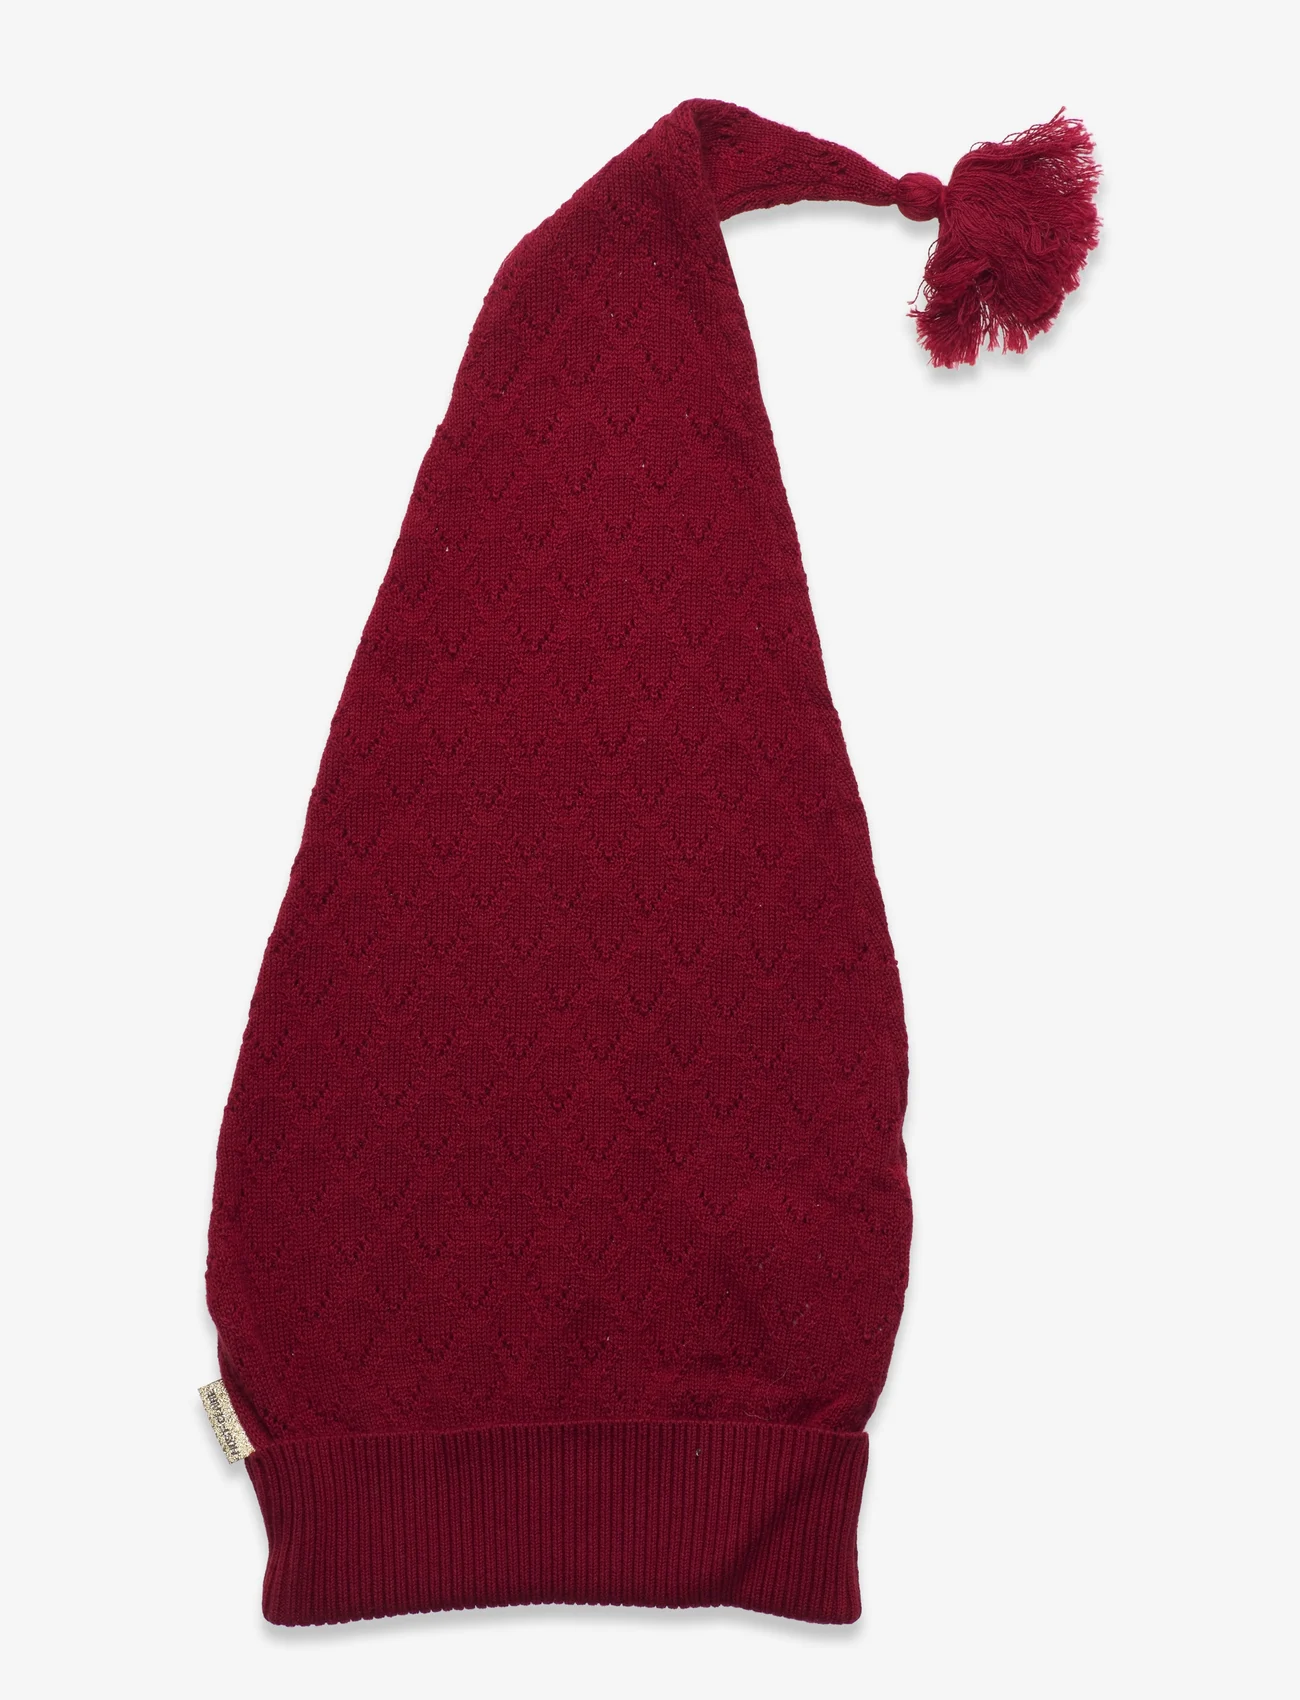 Hust & Claire - Fifi - Christmas hat - maskeradtillbehör - teaberry - 1